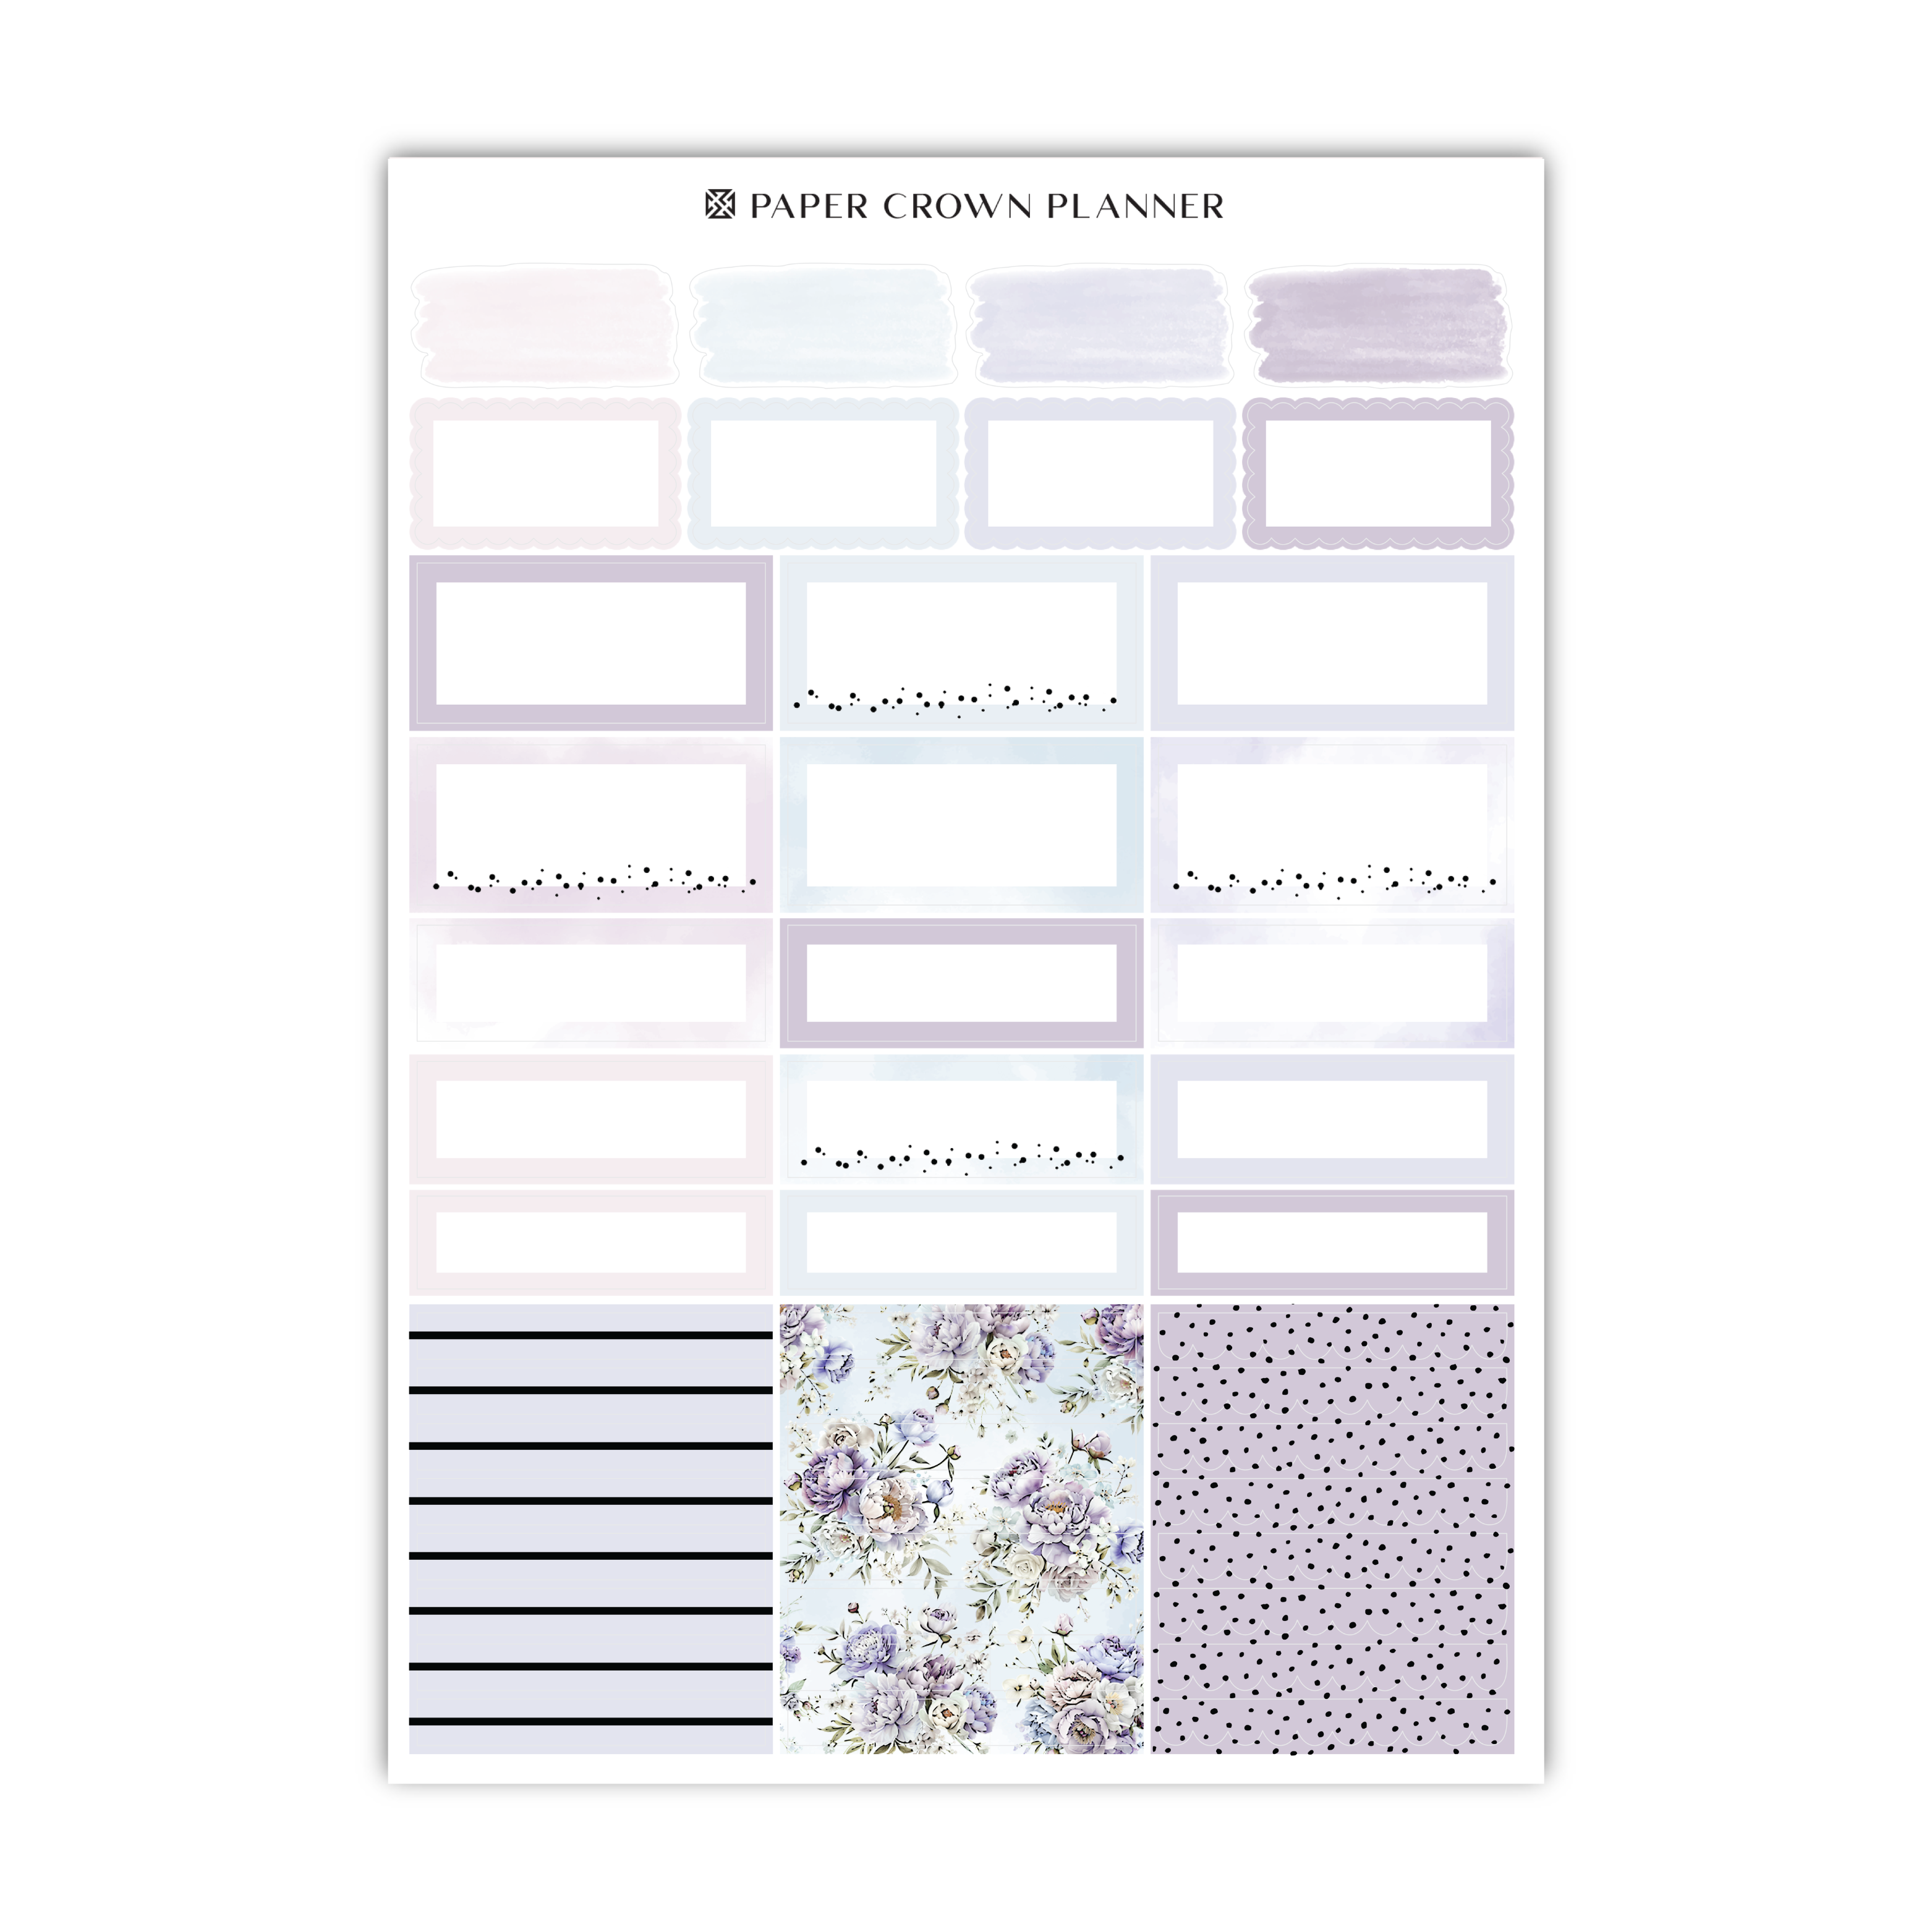 the paper crown planner sticker is shown in lavender and white